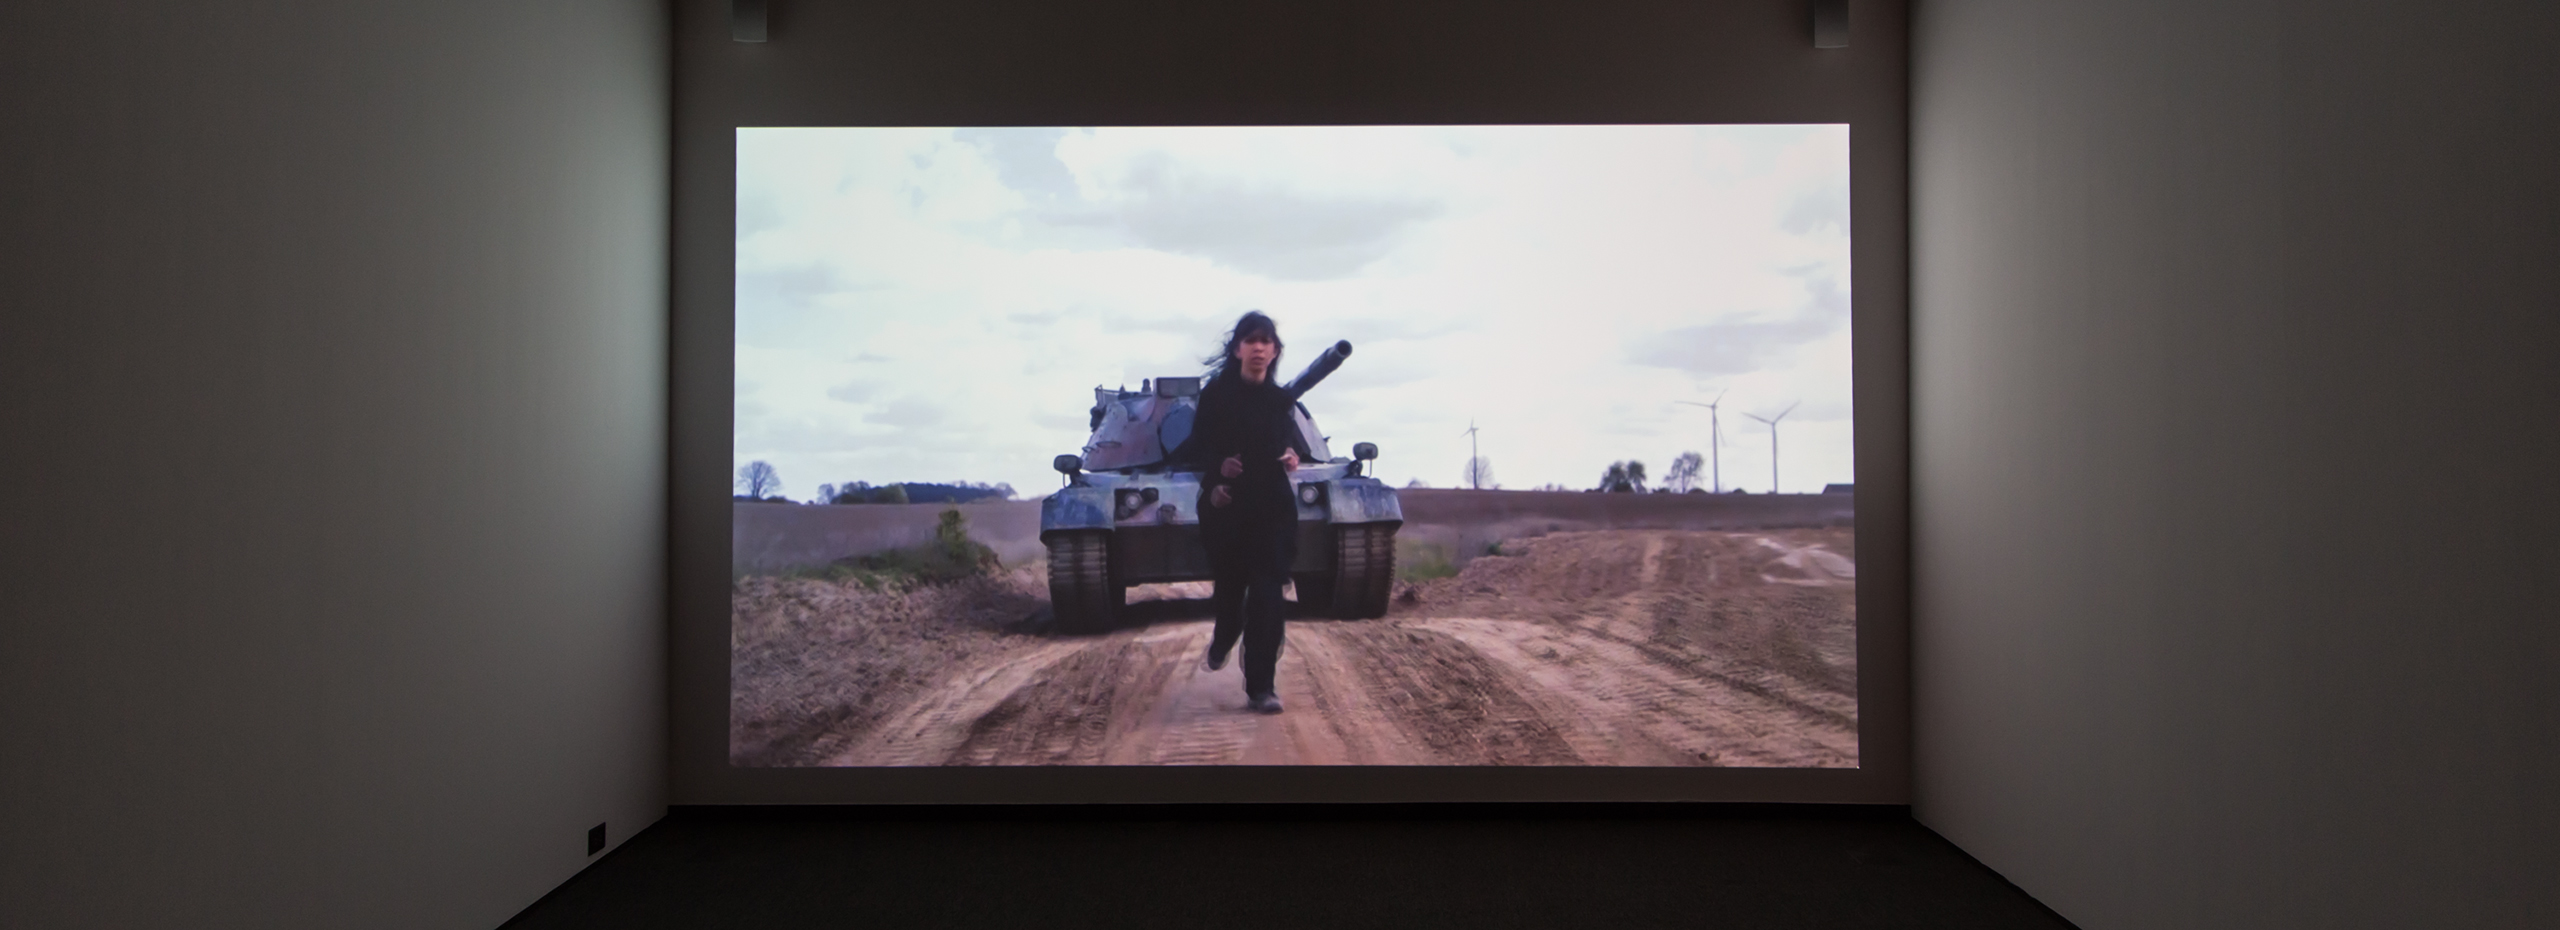 Projected film shows a dark-haired woman in dark clothing running away from a military tank down a dirt road.